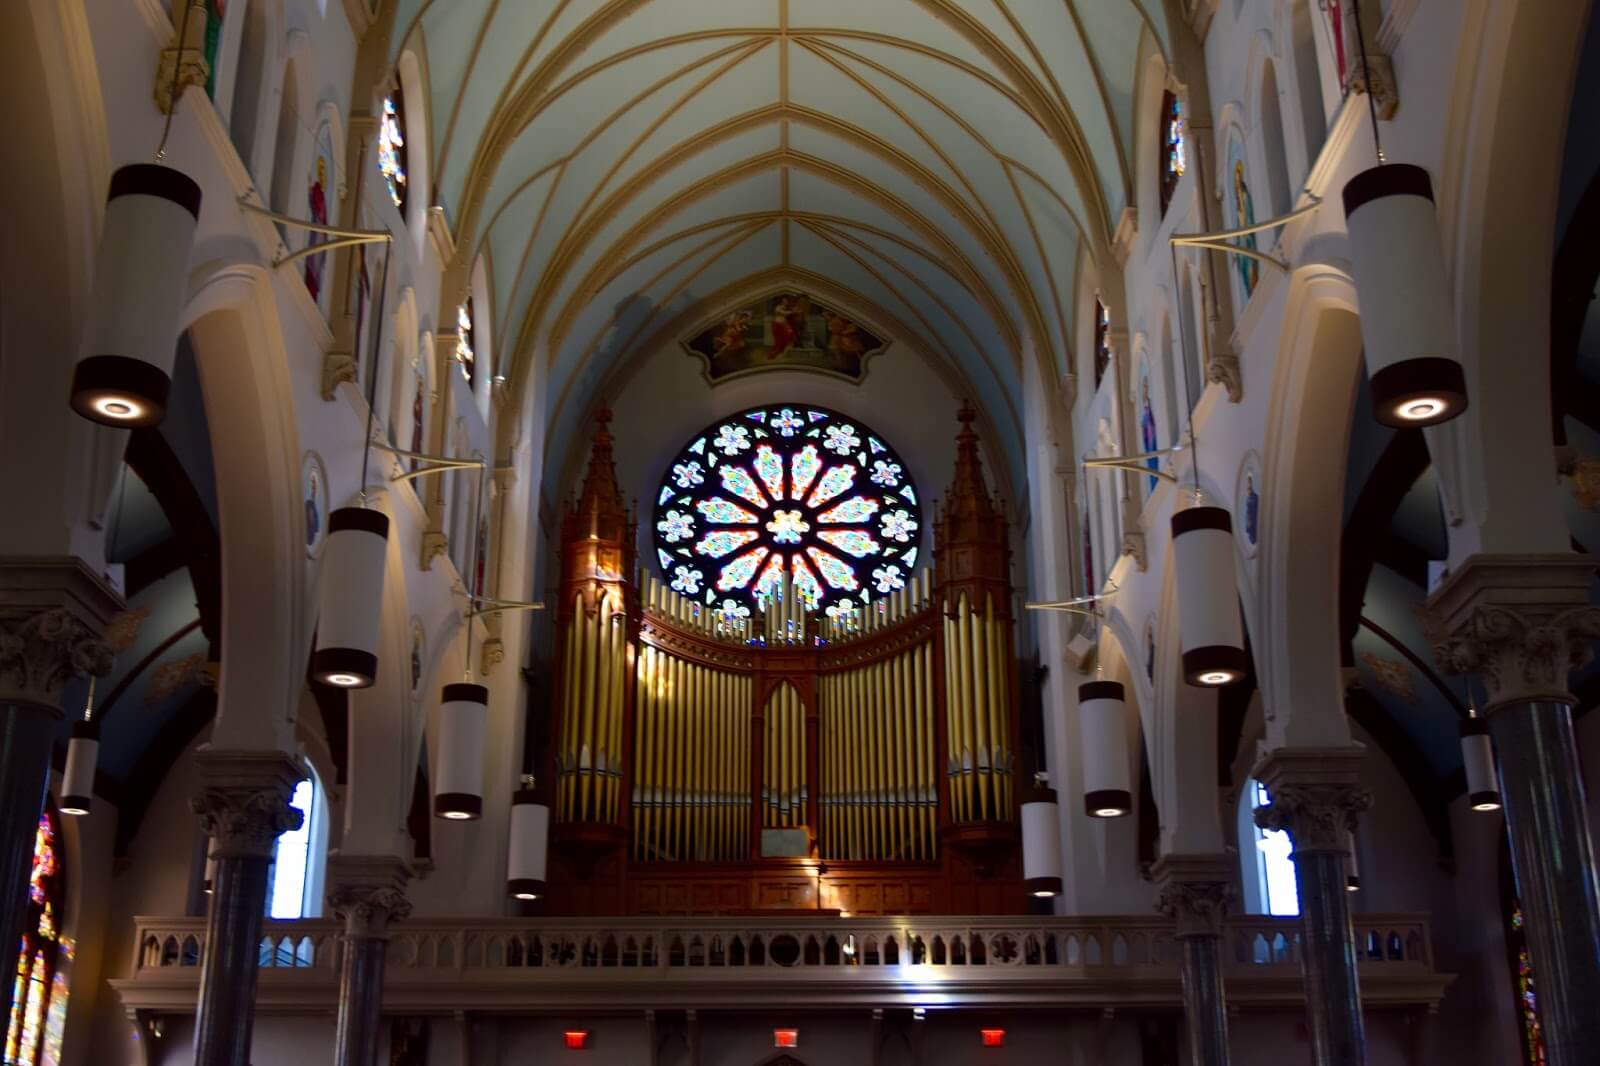 The inside of a church looking at the pipe organ.